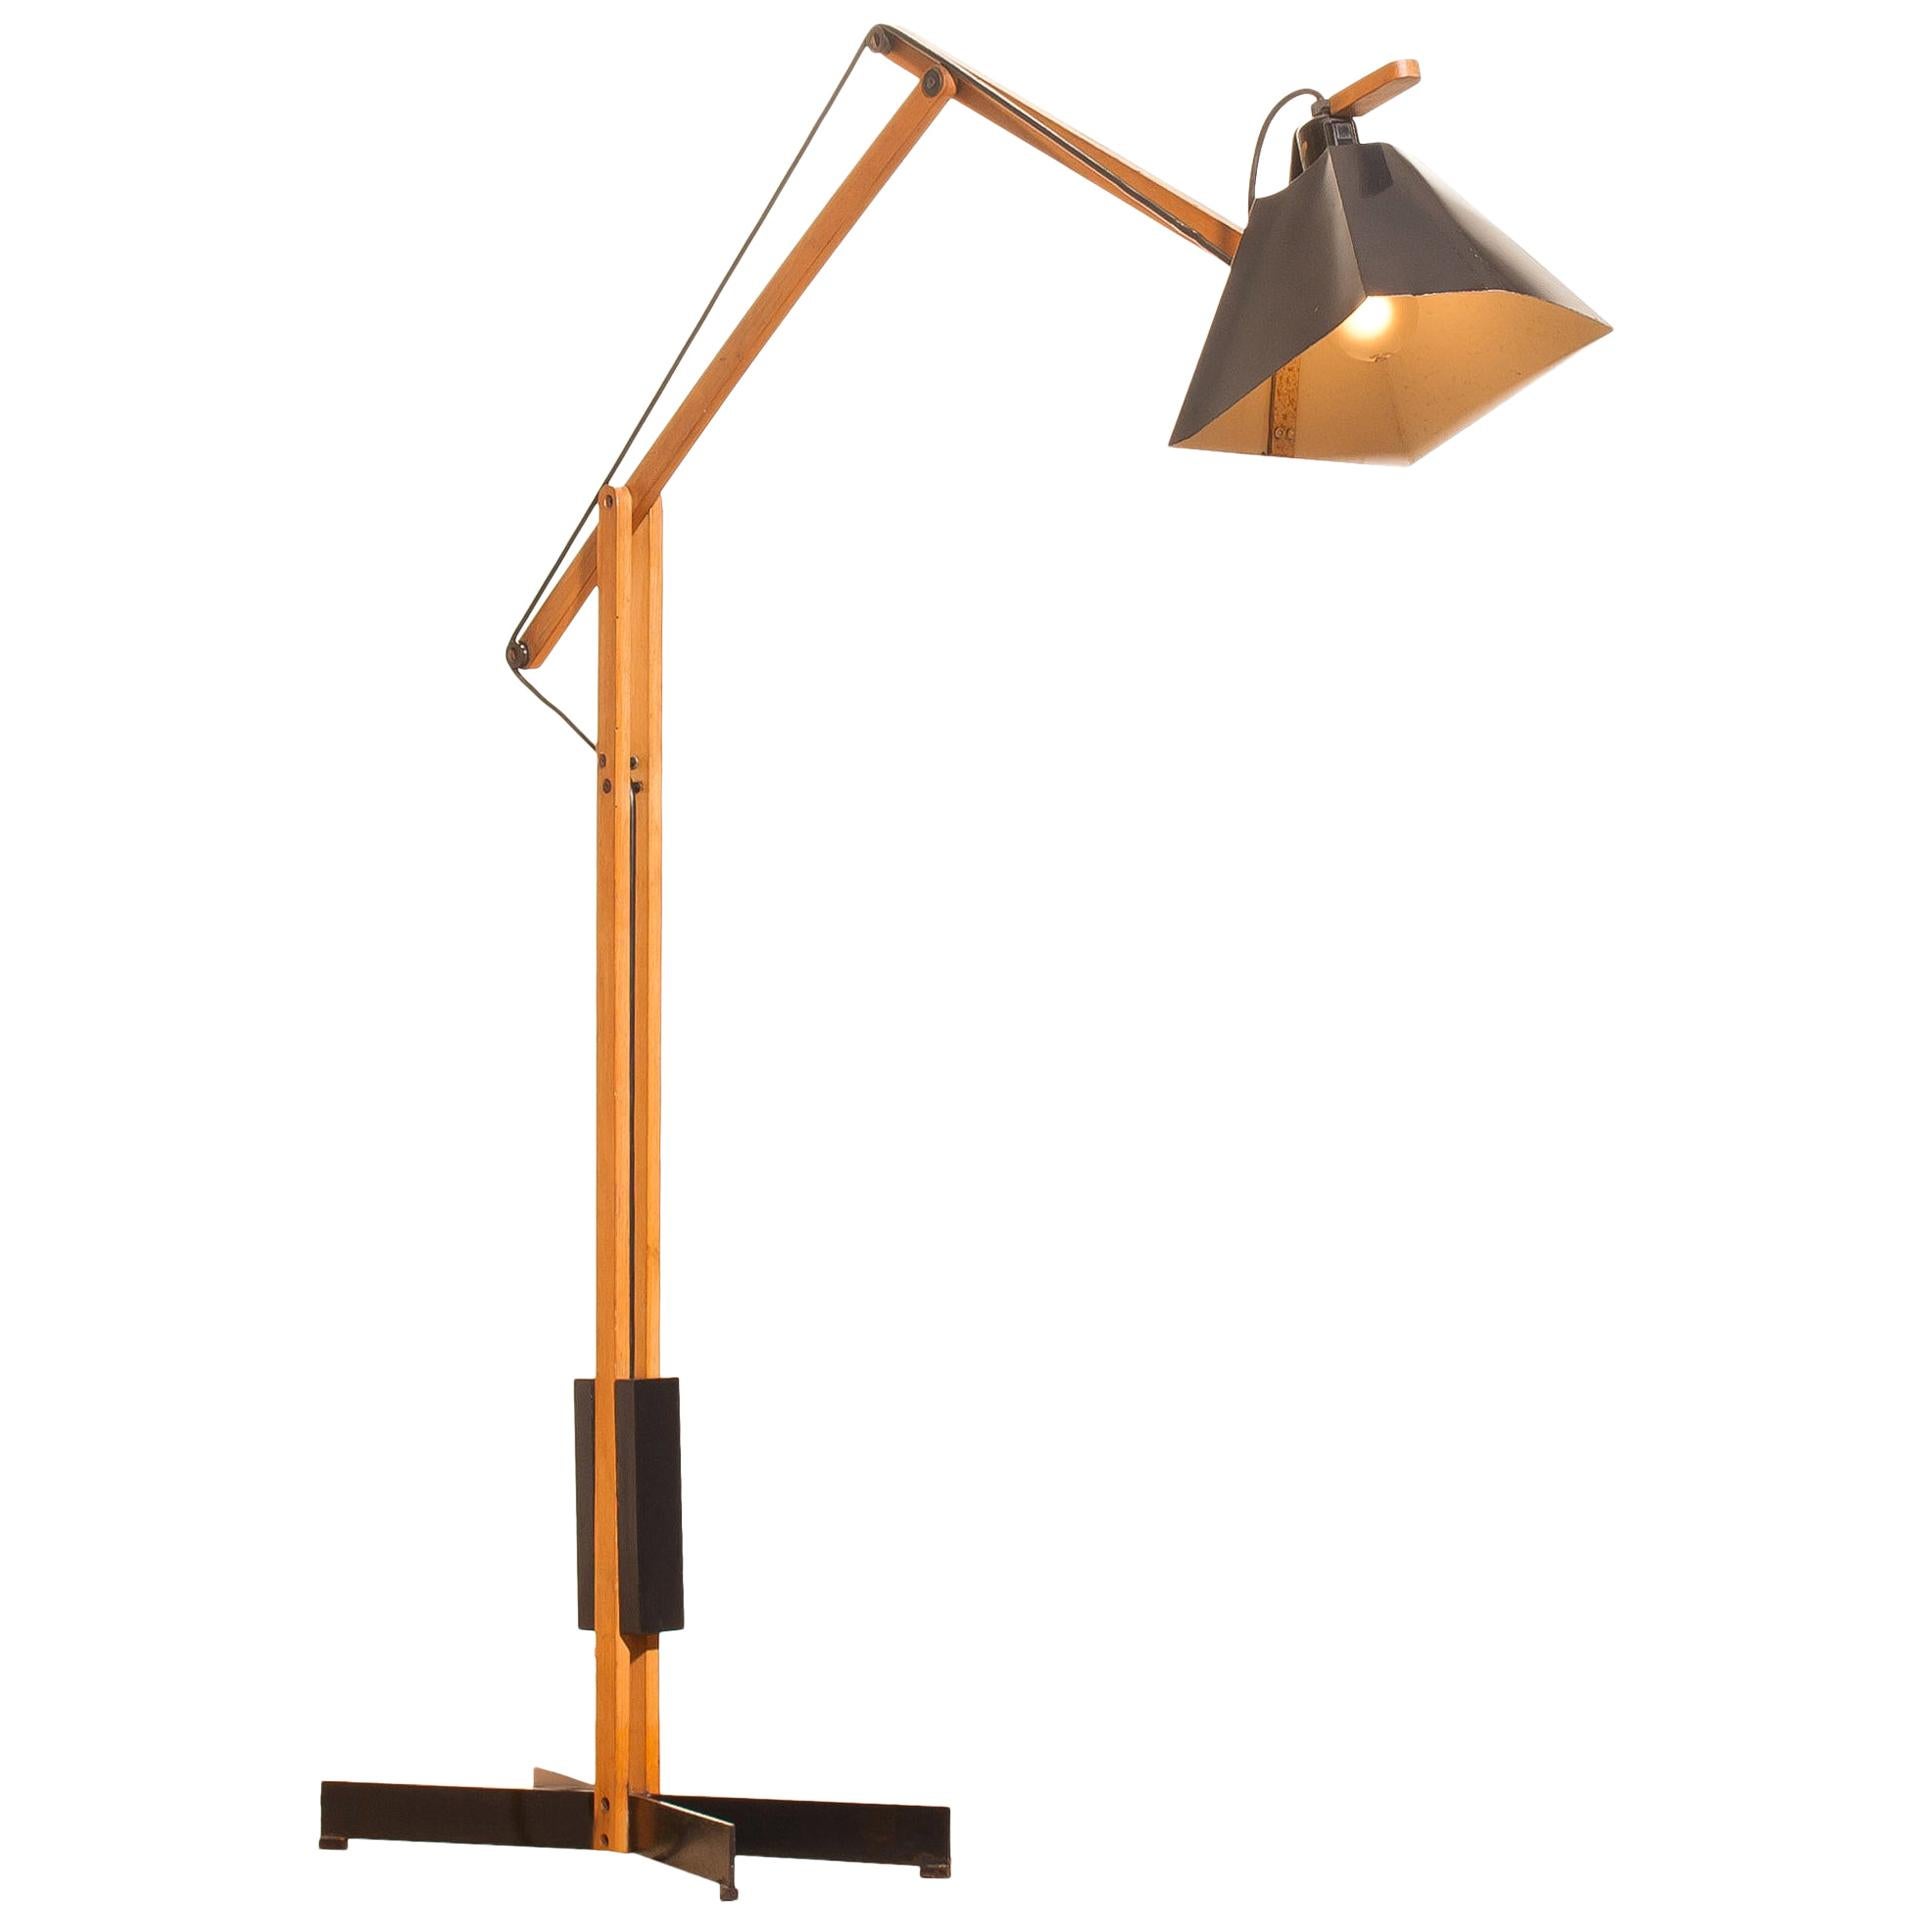 Magnificent rare floor lamp by Luxus, Sweden.
This lamp is adjustable by a counterbalance.
The Stand is made of teak with a black lacquered shade.
It is labelled by Luxus and in a beautiful condition,
circa 1950s.
Dimensions: H 125 cm, D 90 cm,